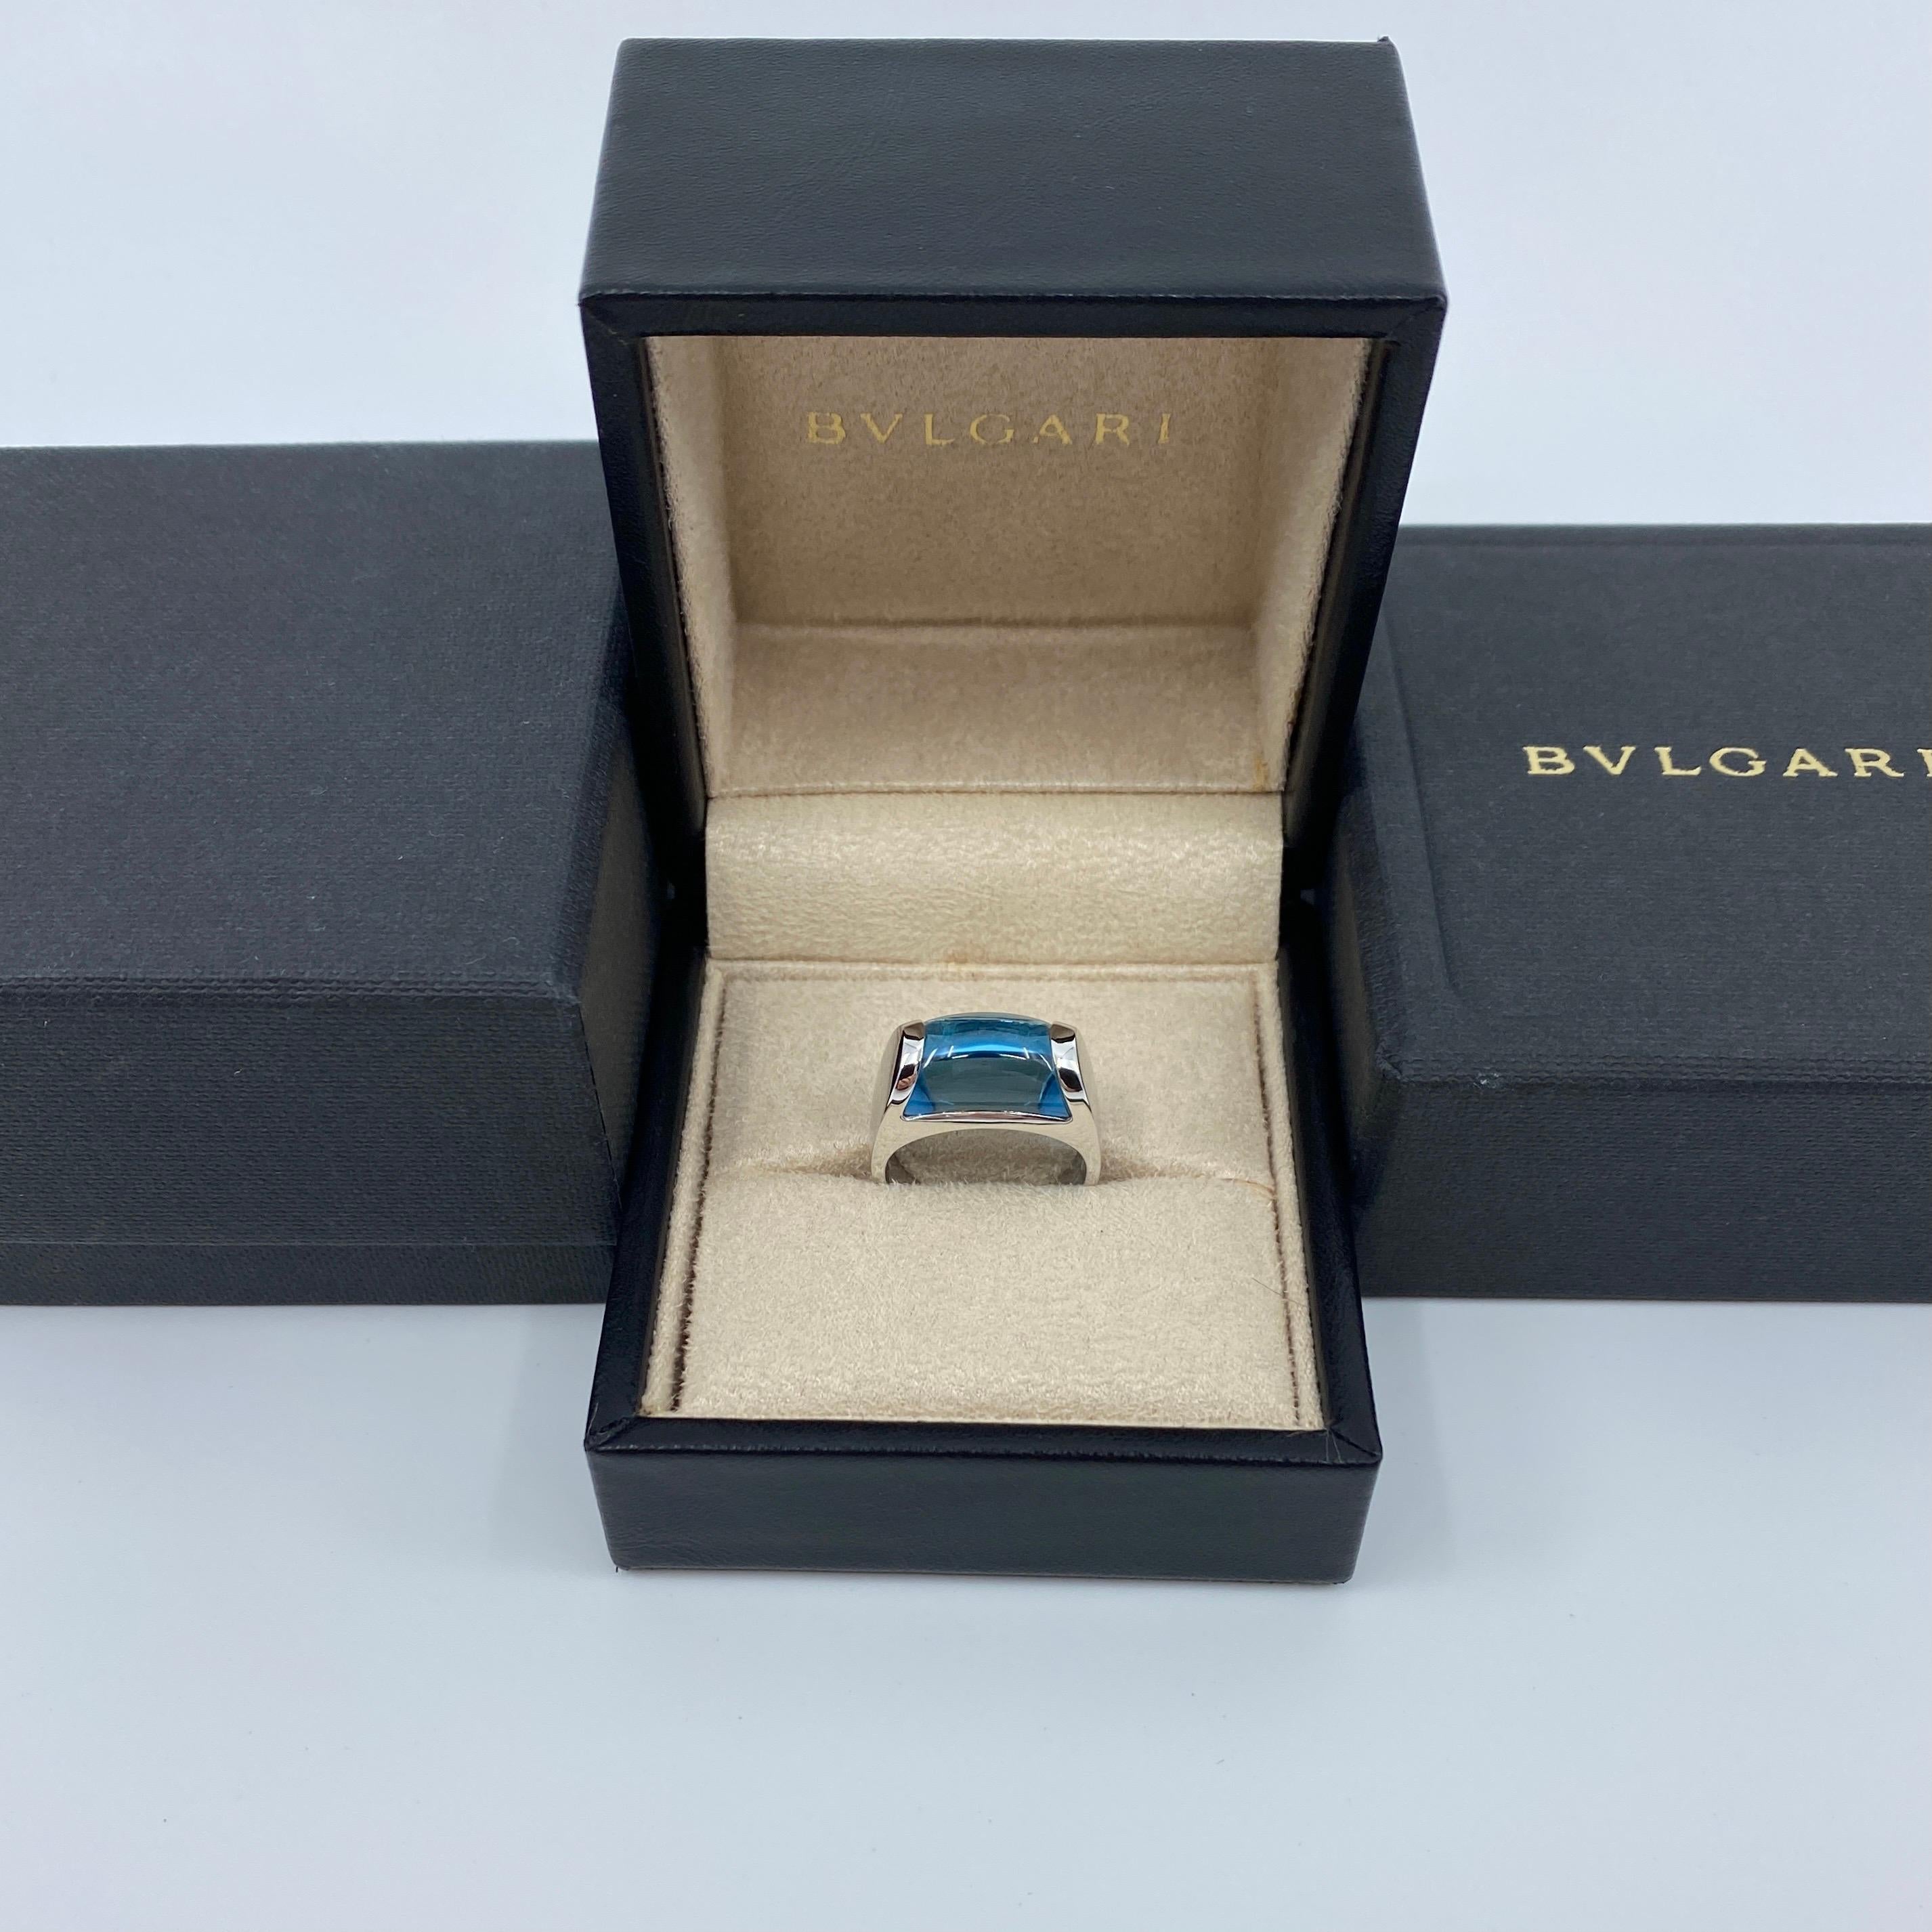 Vintage Bvlgari Blue Topaz Tronchetto 18k White Gold Ring.

Beautiful domed blue topaz set in a fine 18k white gold tension set ring.

In excellent condition, has been professionally polished and cleaned.

Well made, heavy Italian ring. Weighs